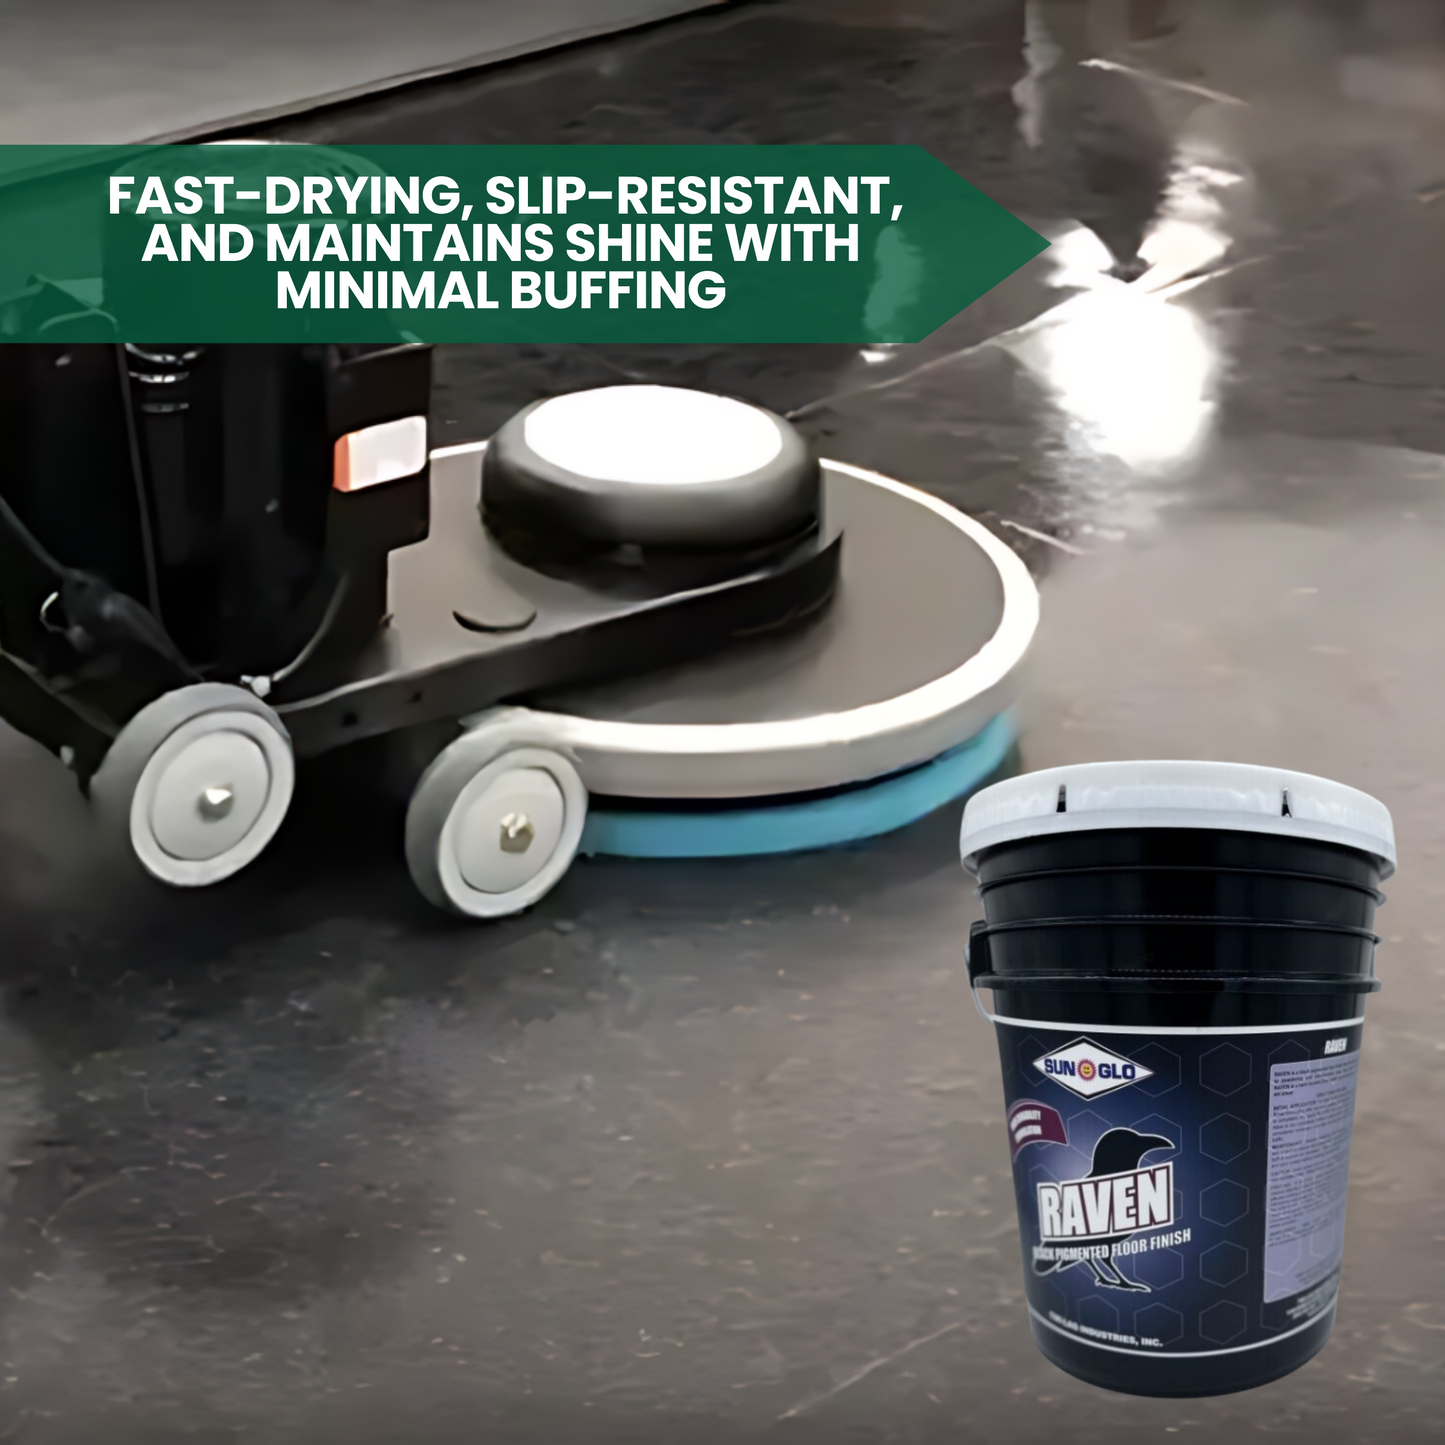 SUN-GLO Raven Black Pigmented Floor Finish | Commercial and Industrial Flooring Protection | Glossy Black Flooring Finish | Creates Brilliant Super Gloss Black Finish Surface (5 Gallon - Pail)